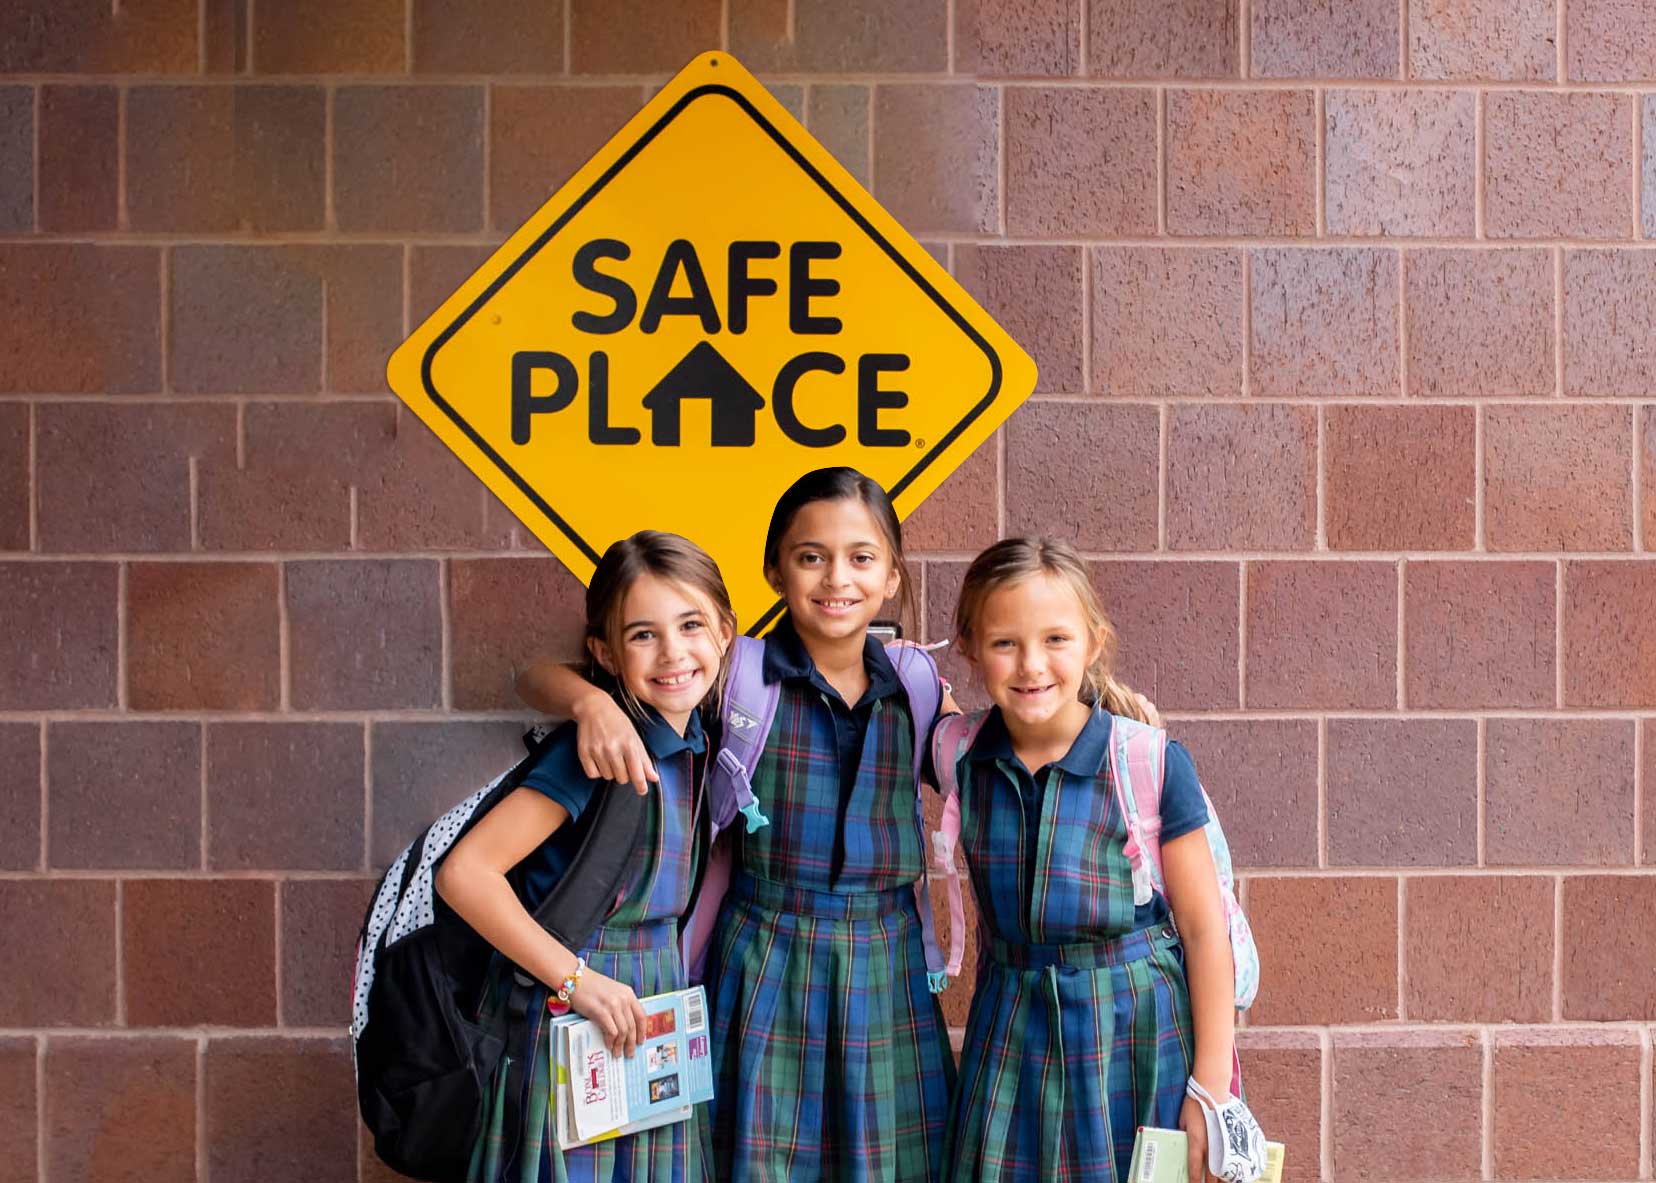 Thinking Differently - Re-imagining School Safety, Saving Minutes When Seconds Count